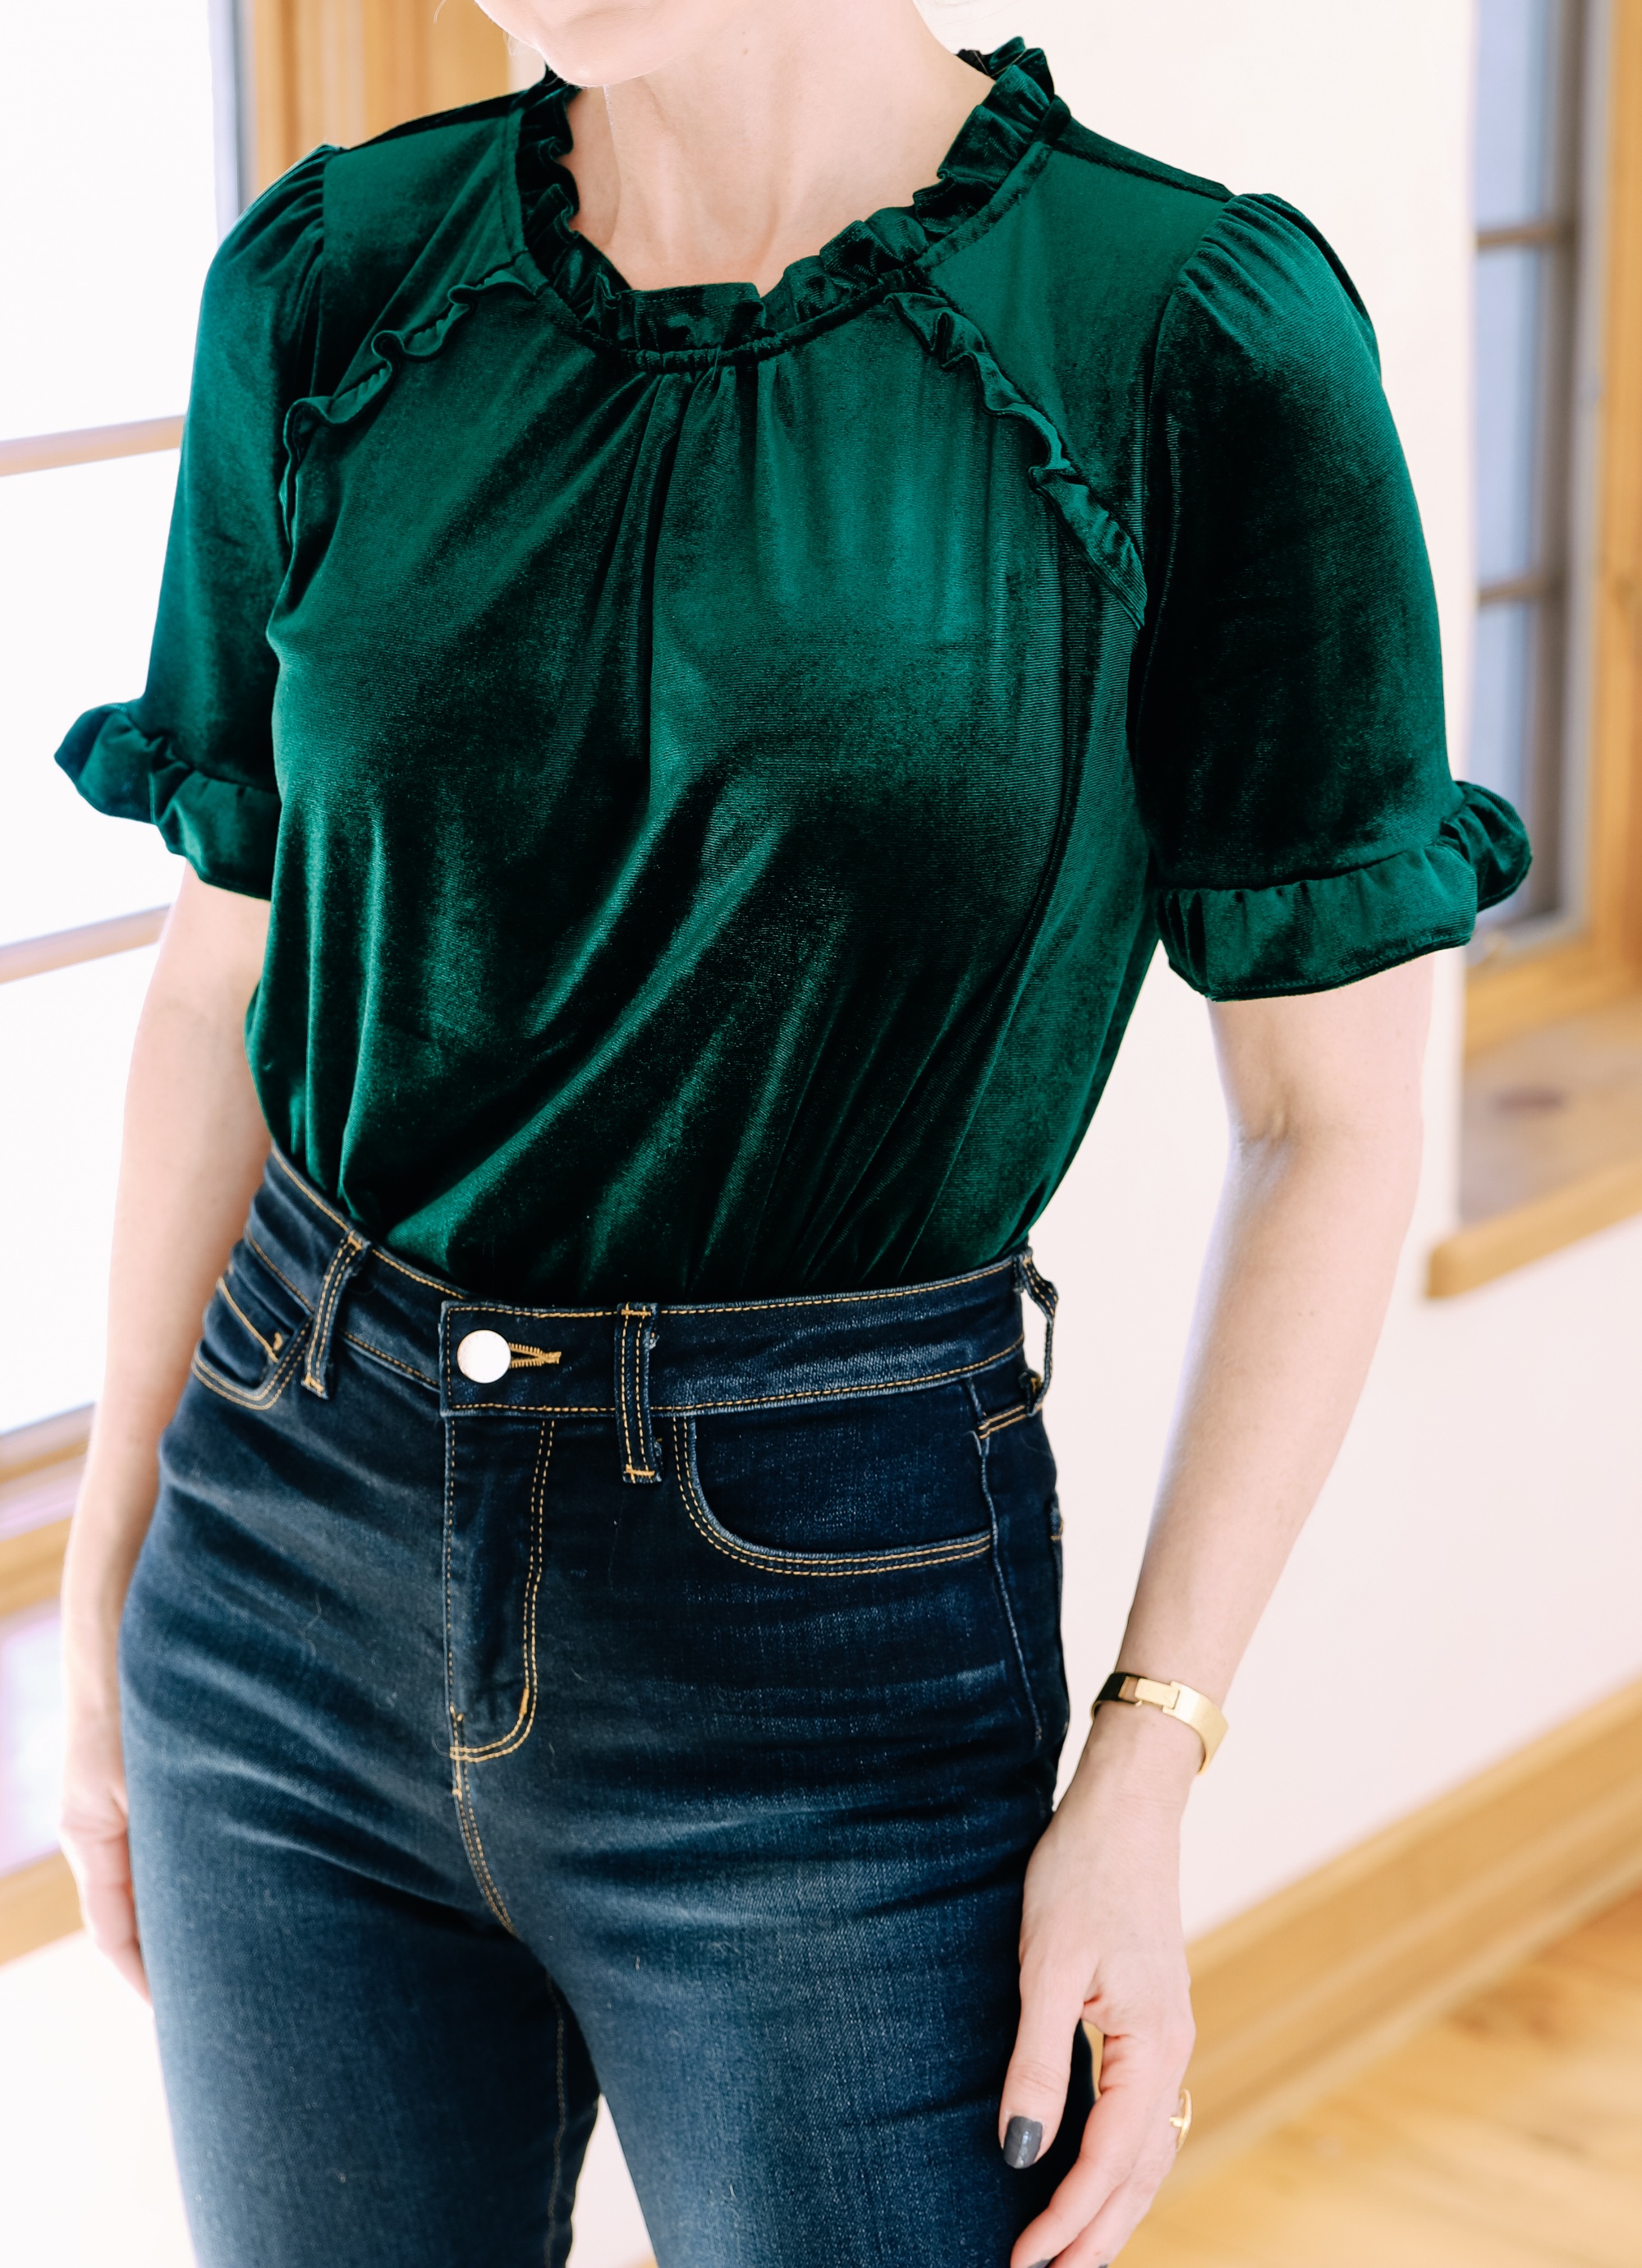 Holiday Outfits With Jeans, Erin Busbee of Busbee Style wearing a green velvet ruffle sleeve blouse by Gibson, L'Agence dark wash skinny jeans, and black Jimmy Choo Romy pumps from Nordstrom in Telluride, Colorado